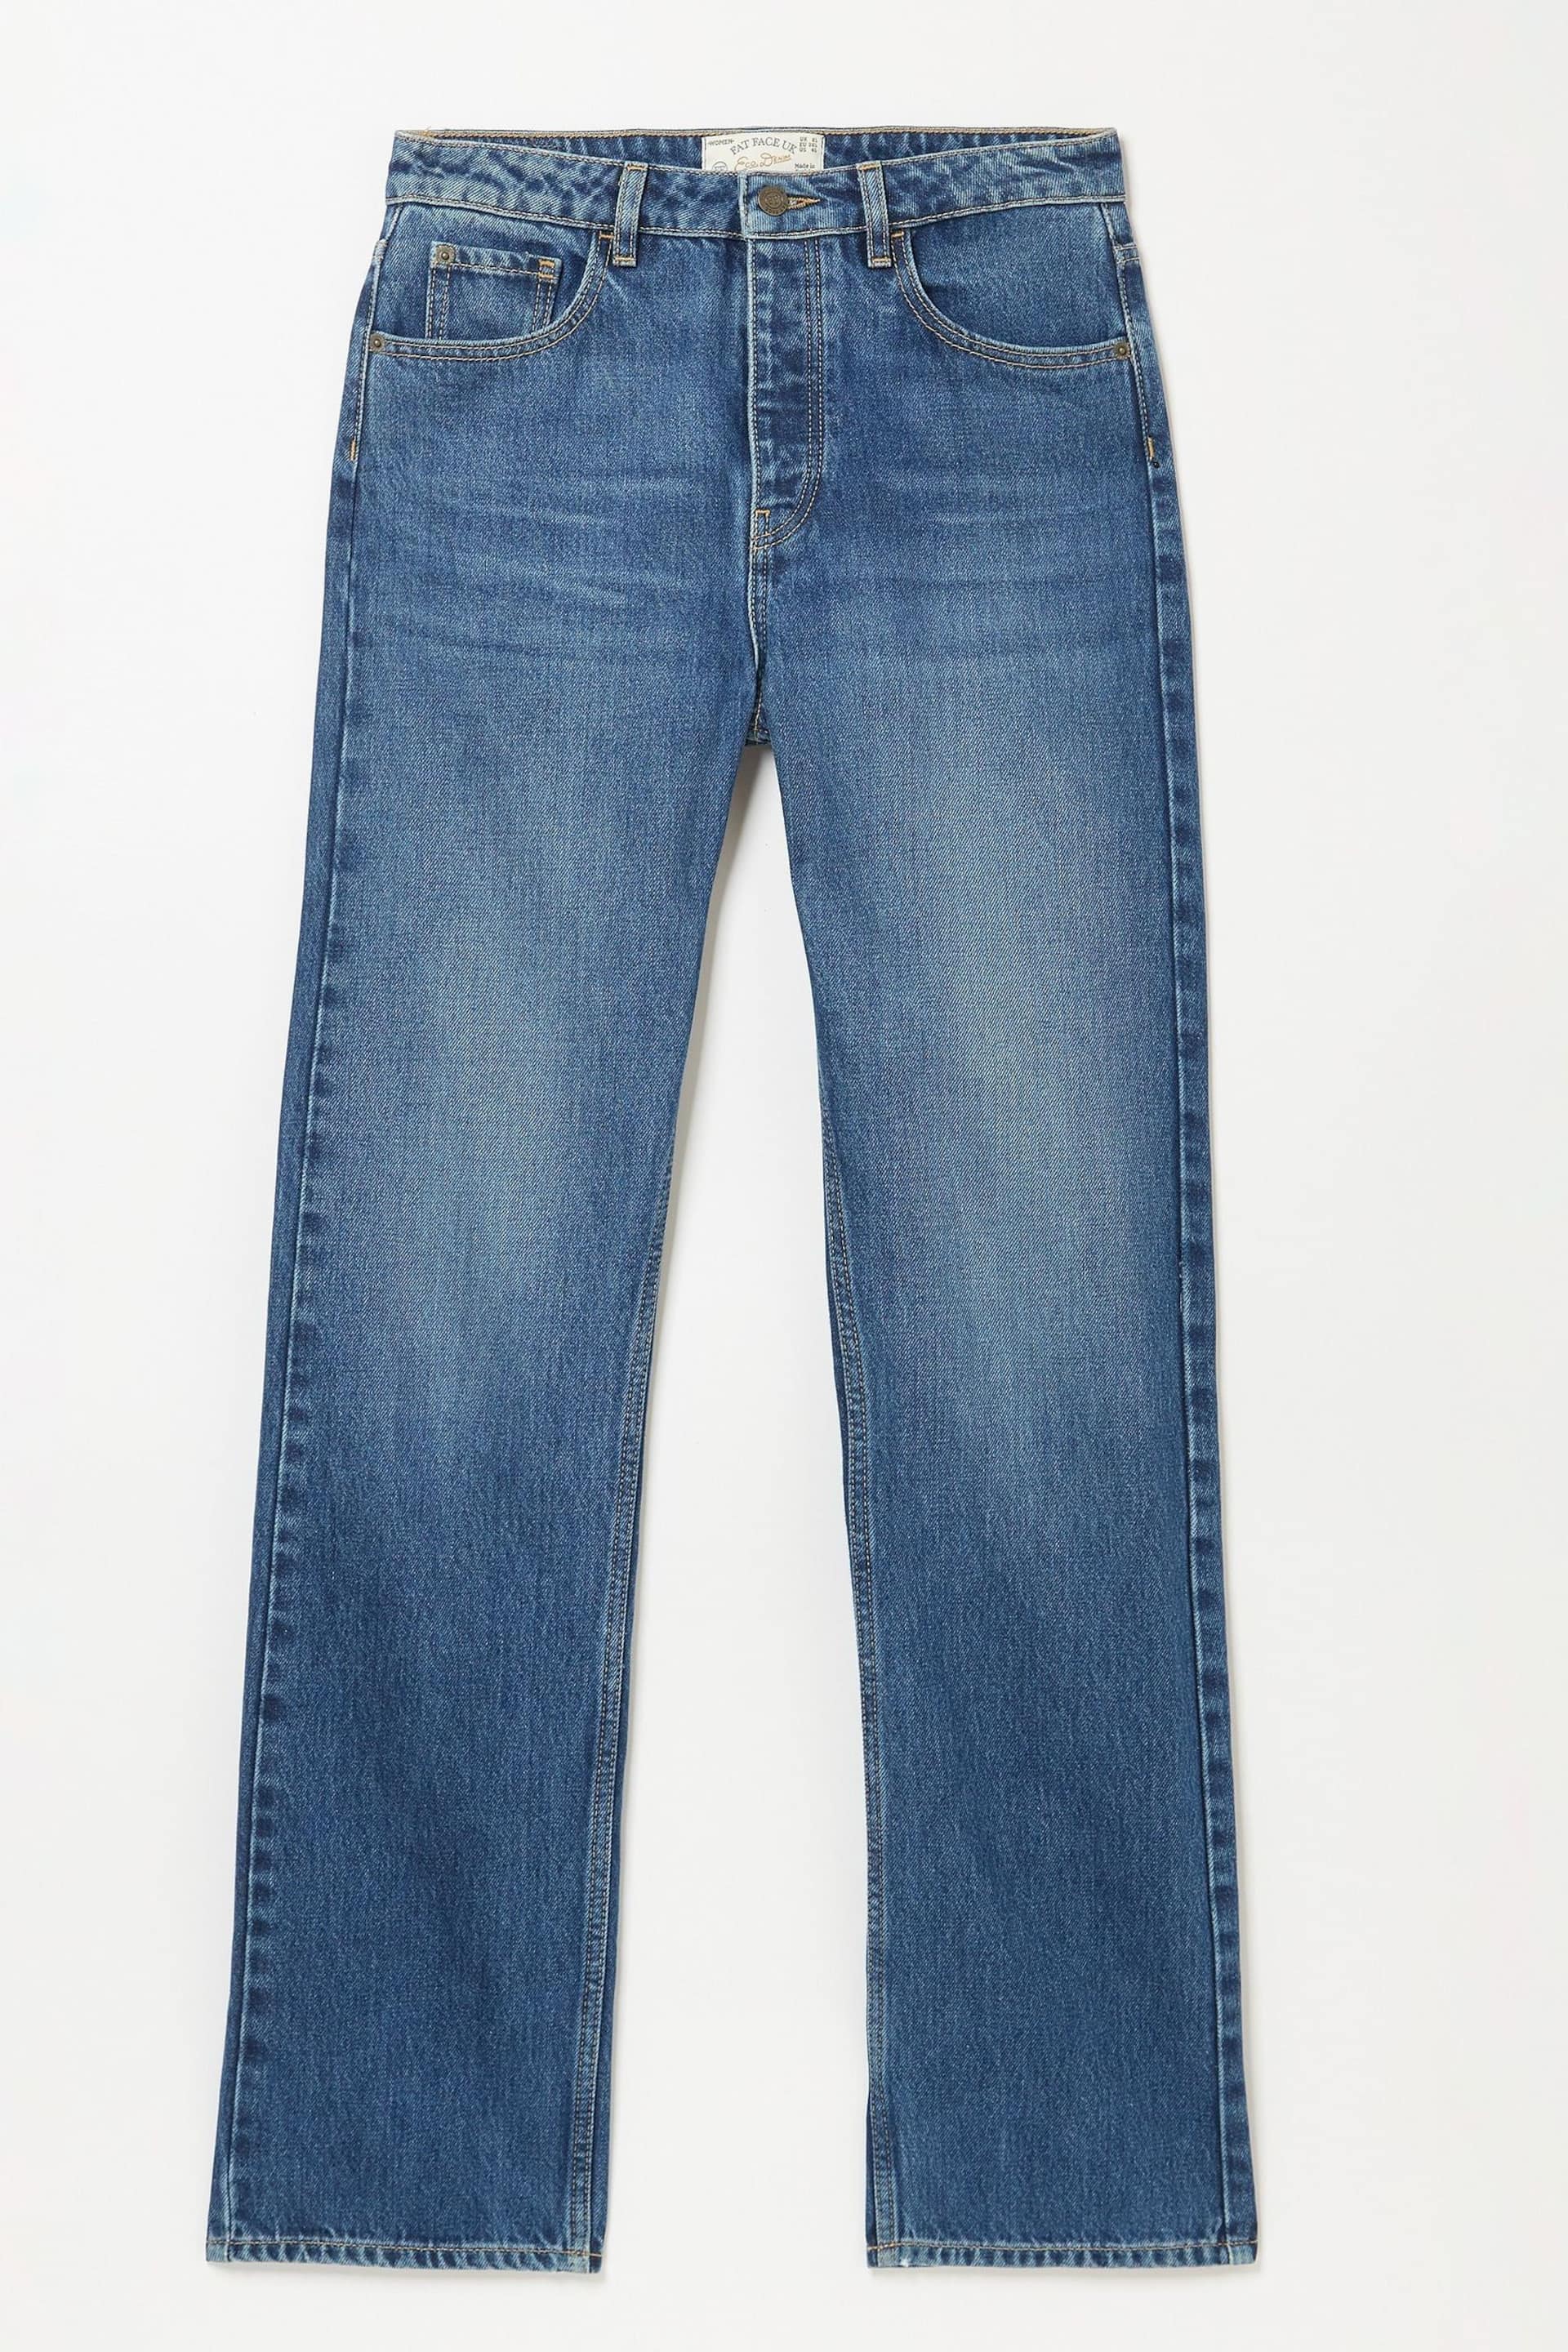 FatFace Blue Sutton Straight Jeans - Image 5 of 5